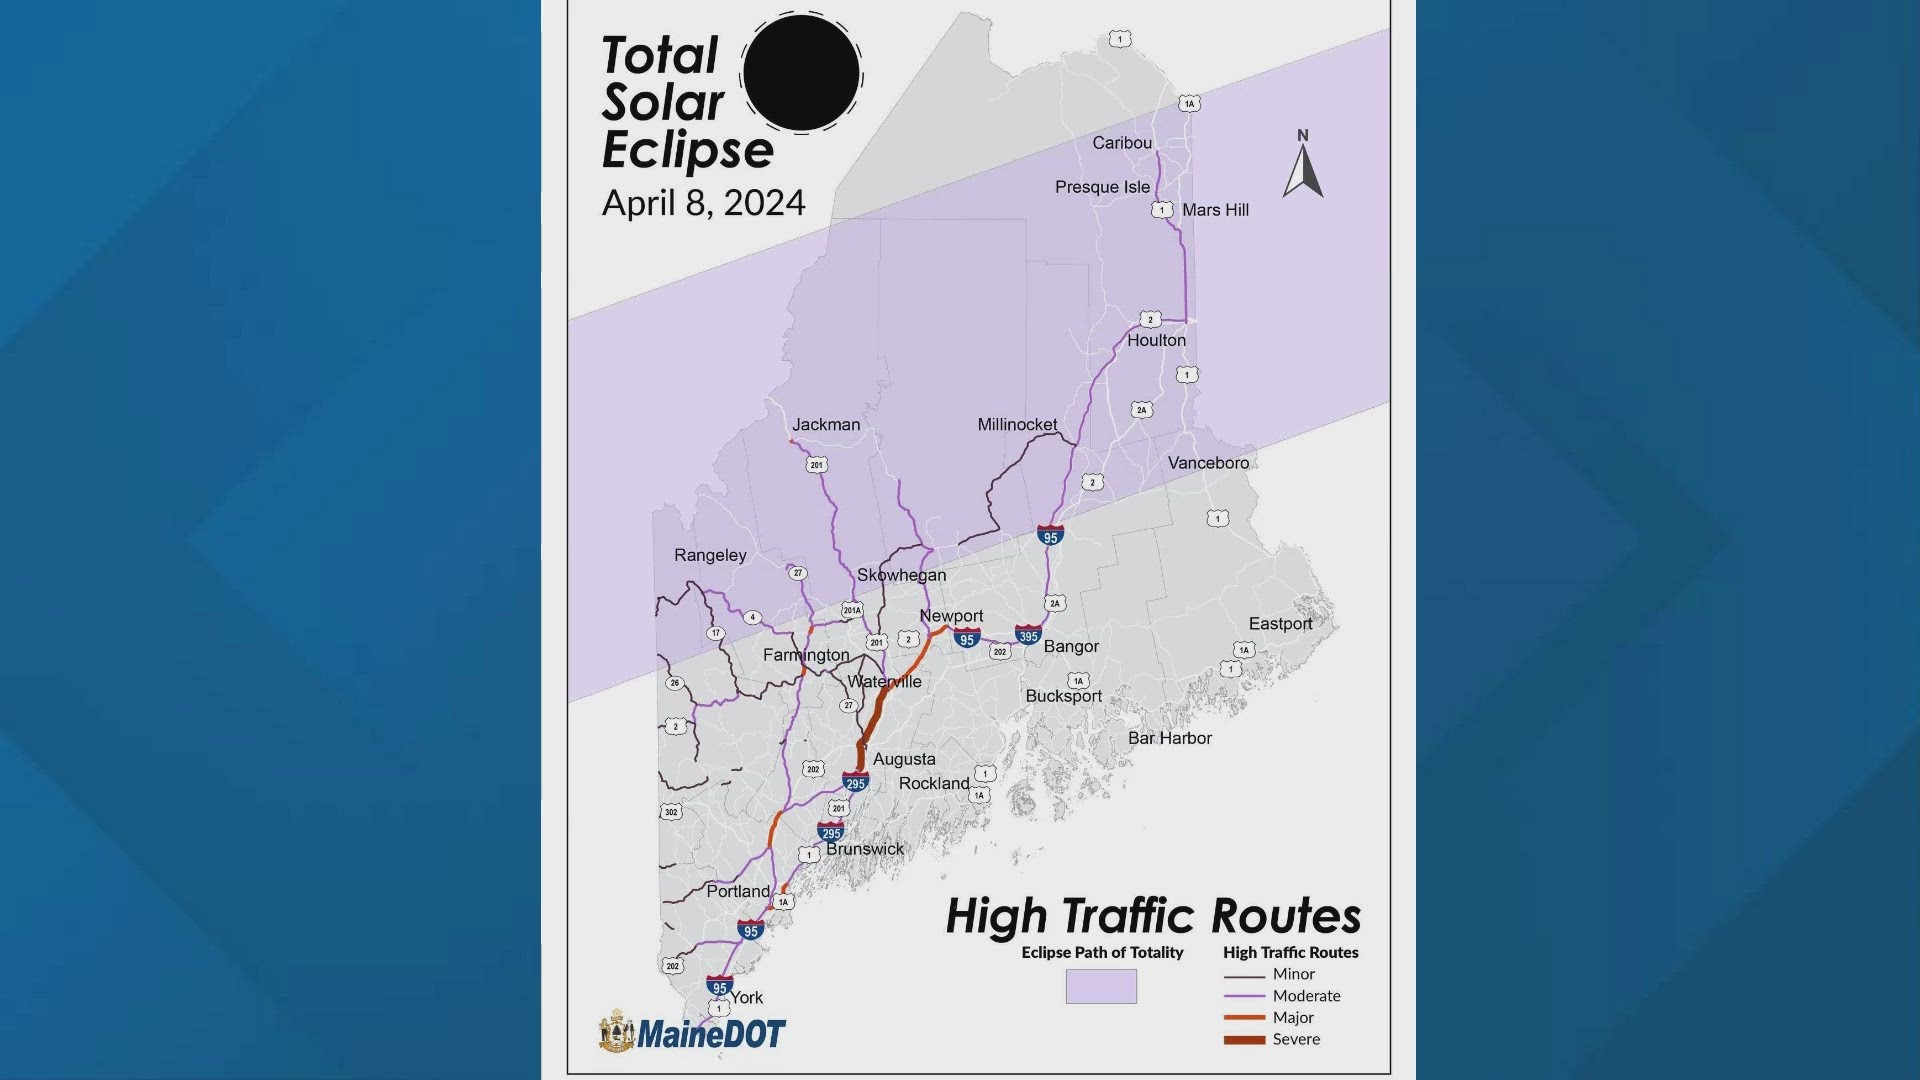 The Maine Department of Transportation shared a map breaking down where they anticipate traffic issues April 8, as travelers make their way to the path of totality.